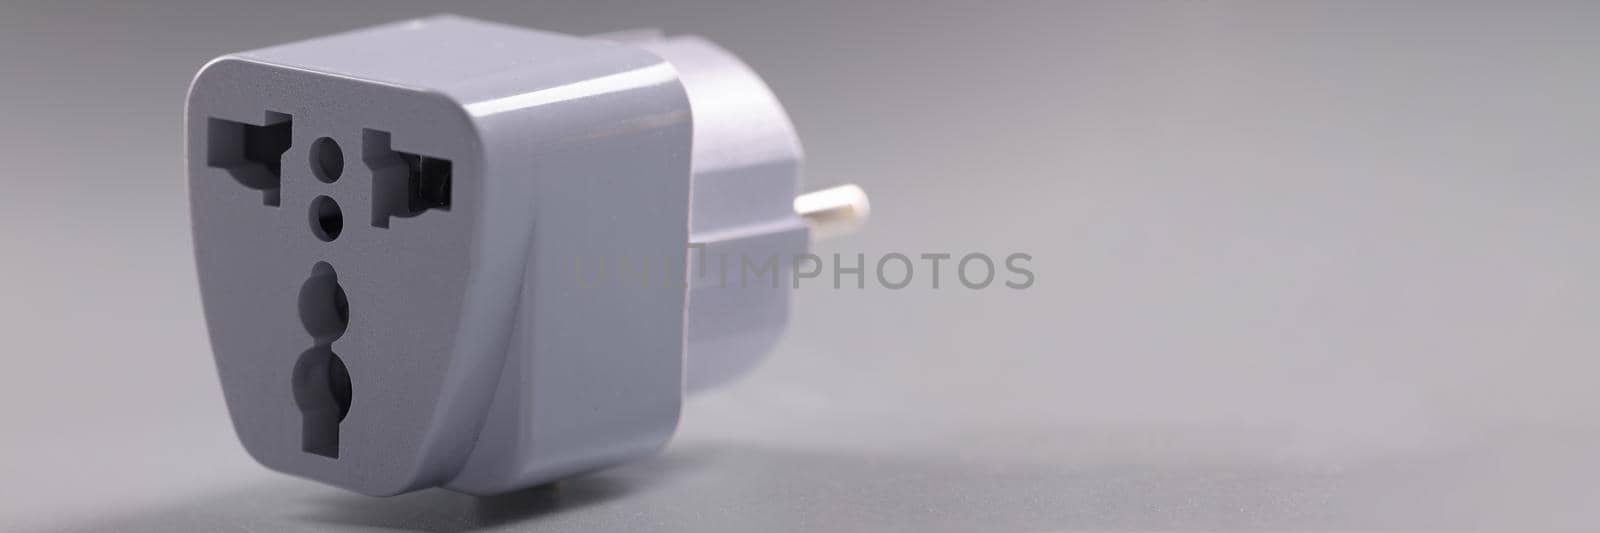 Close-up of universal white plugs adapter, adapter to put in sockets. Multi plug travel size power adapter. Charge, energy, electricity, connector concept